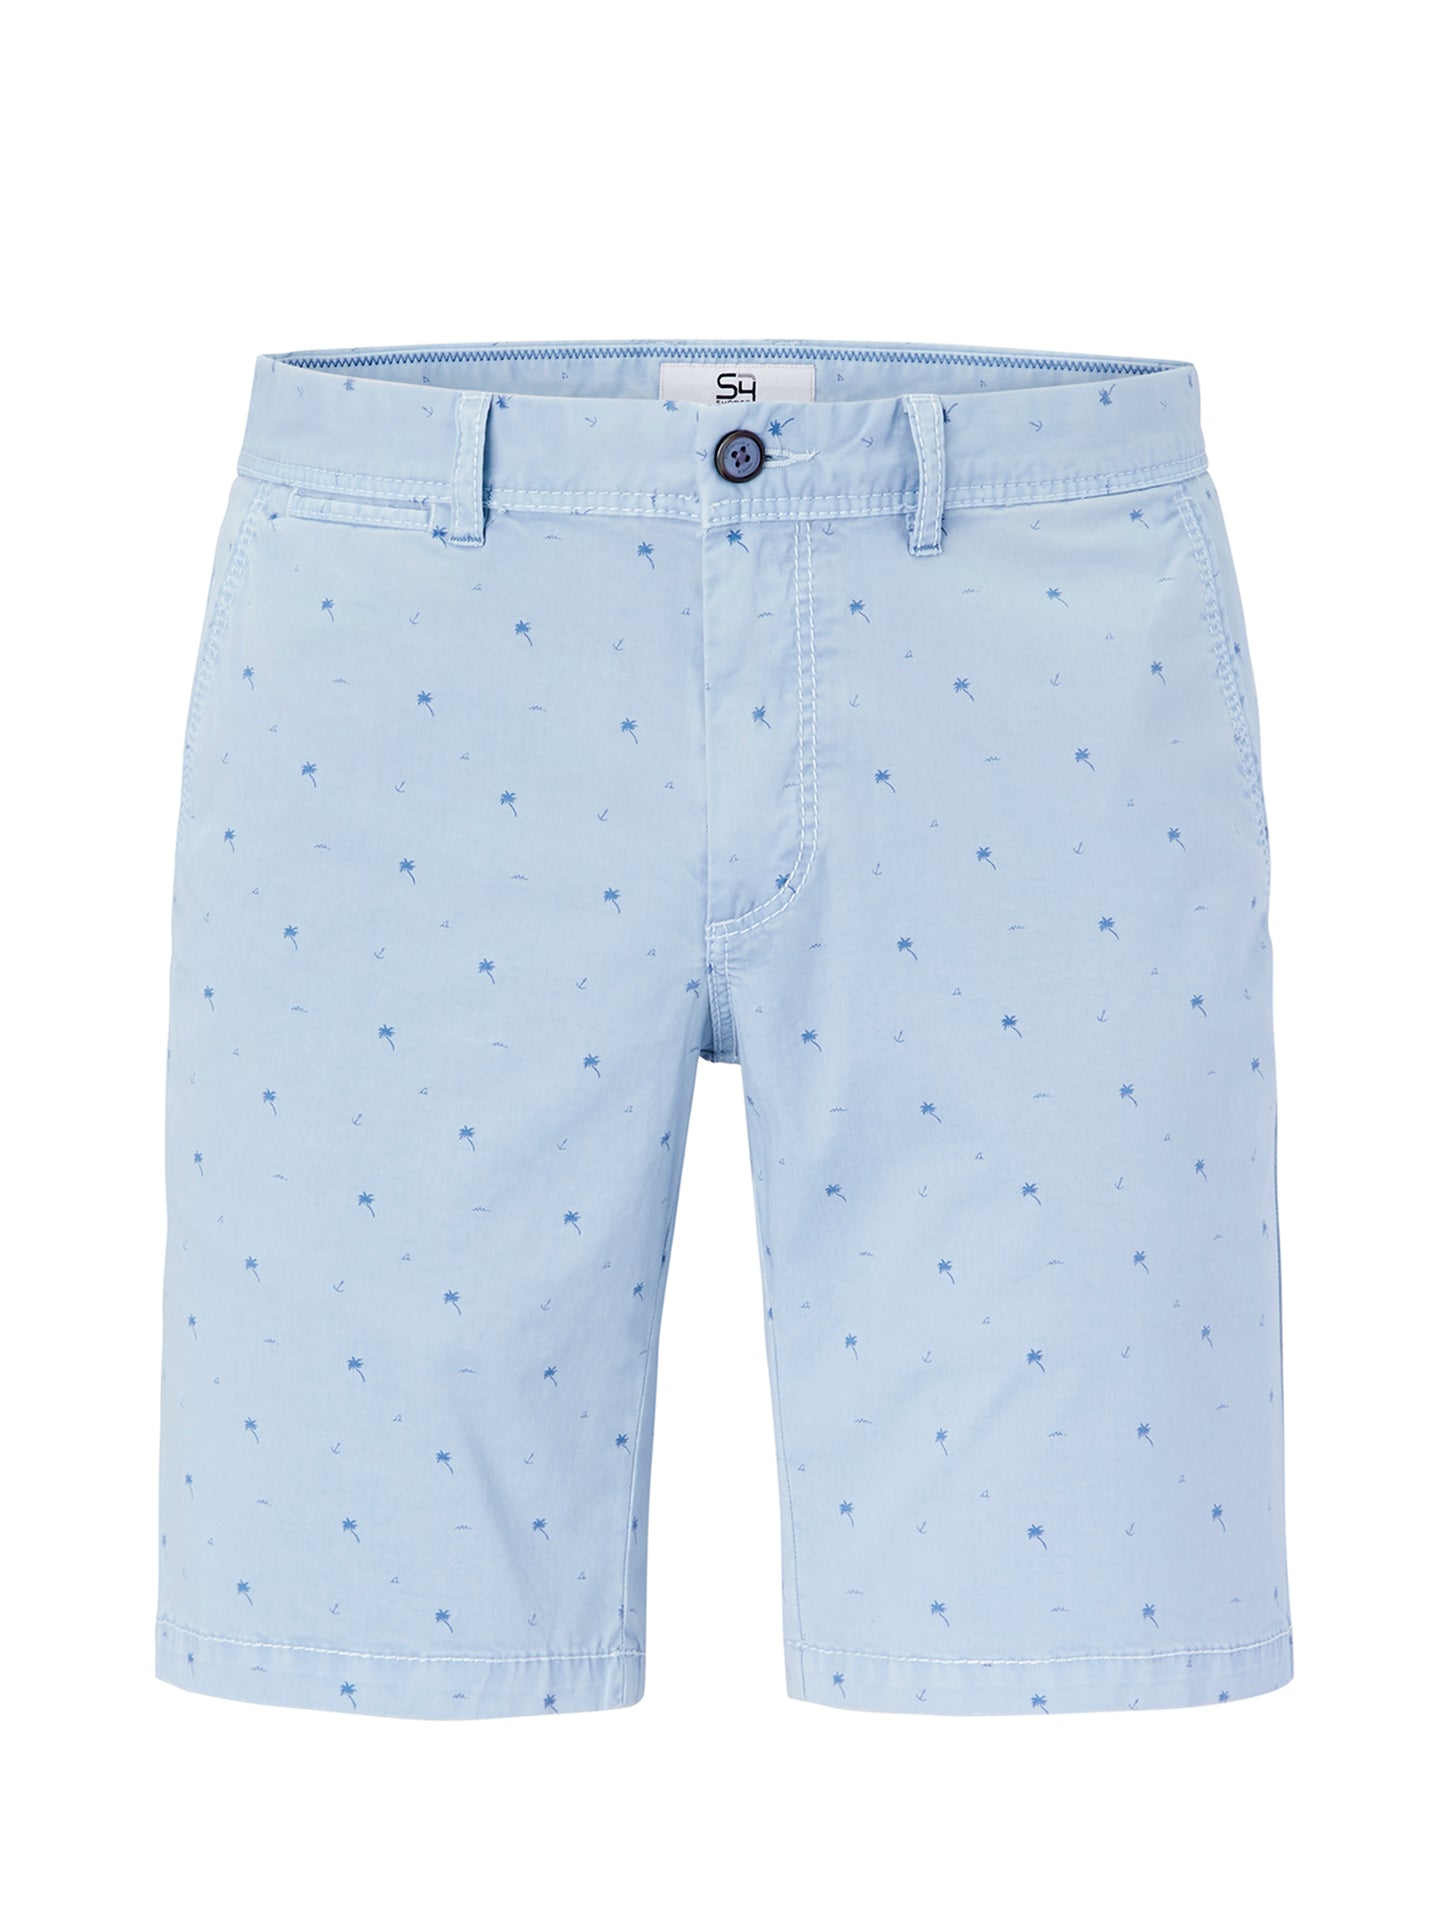 Shorts in blue with nautical print by S4